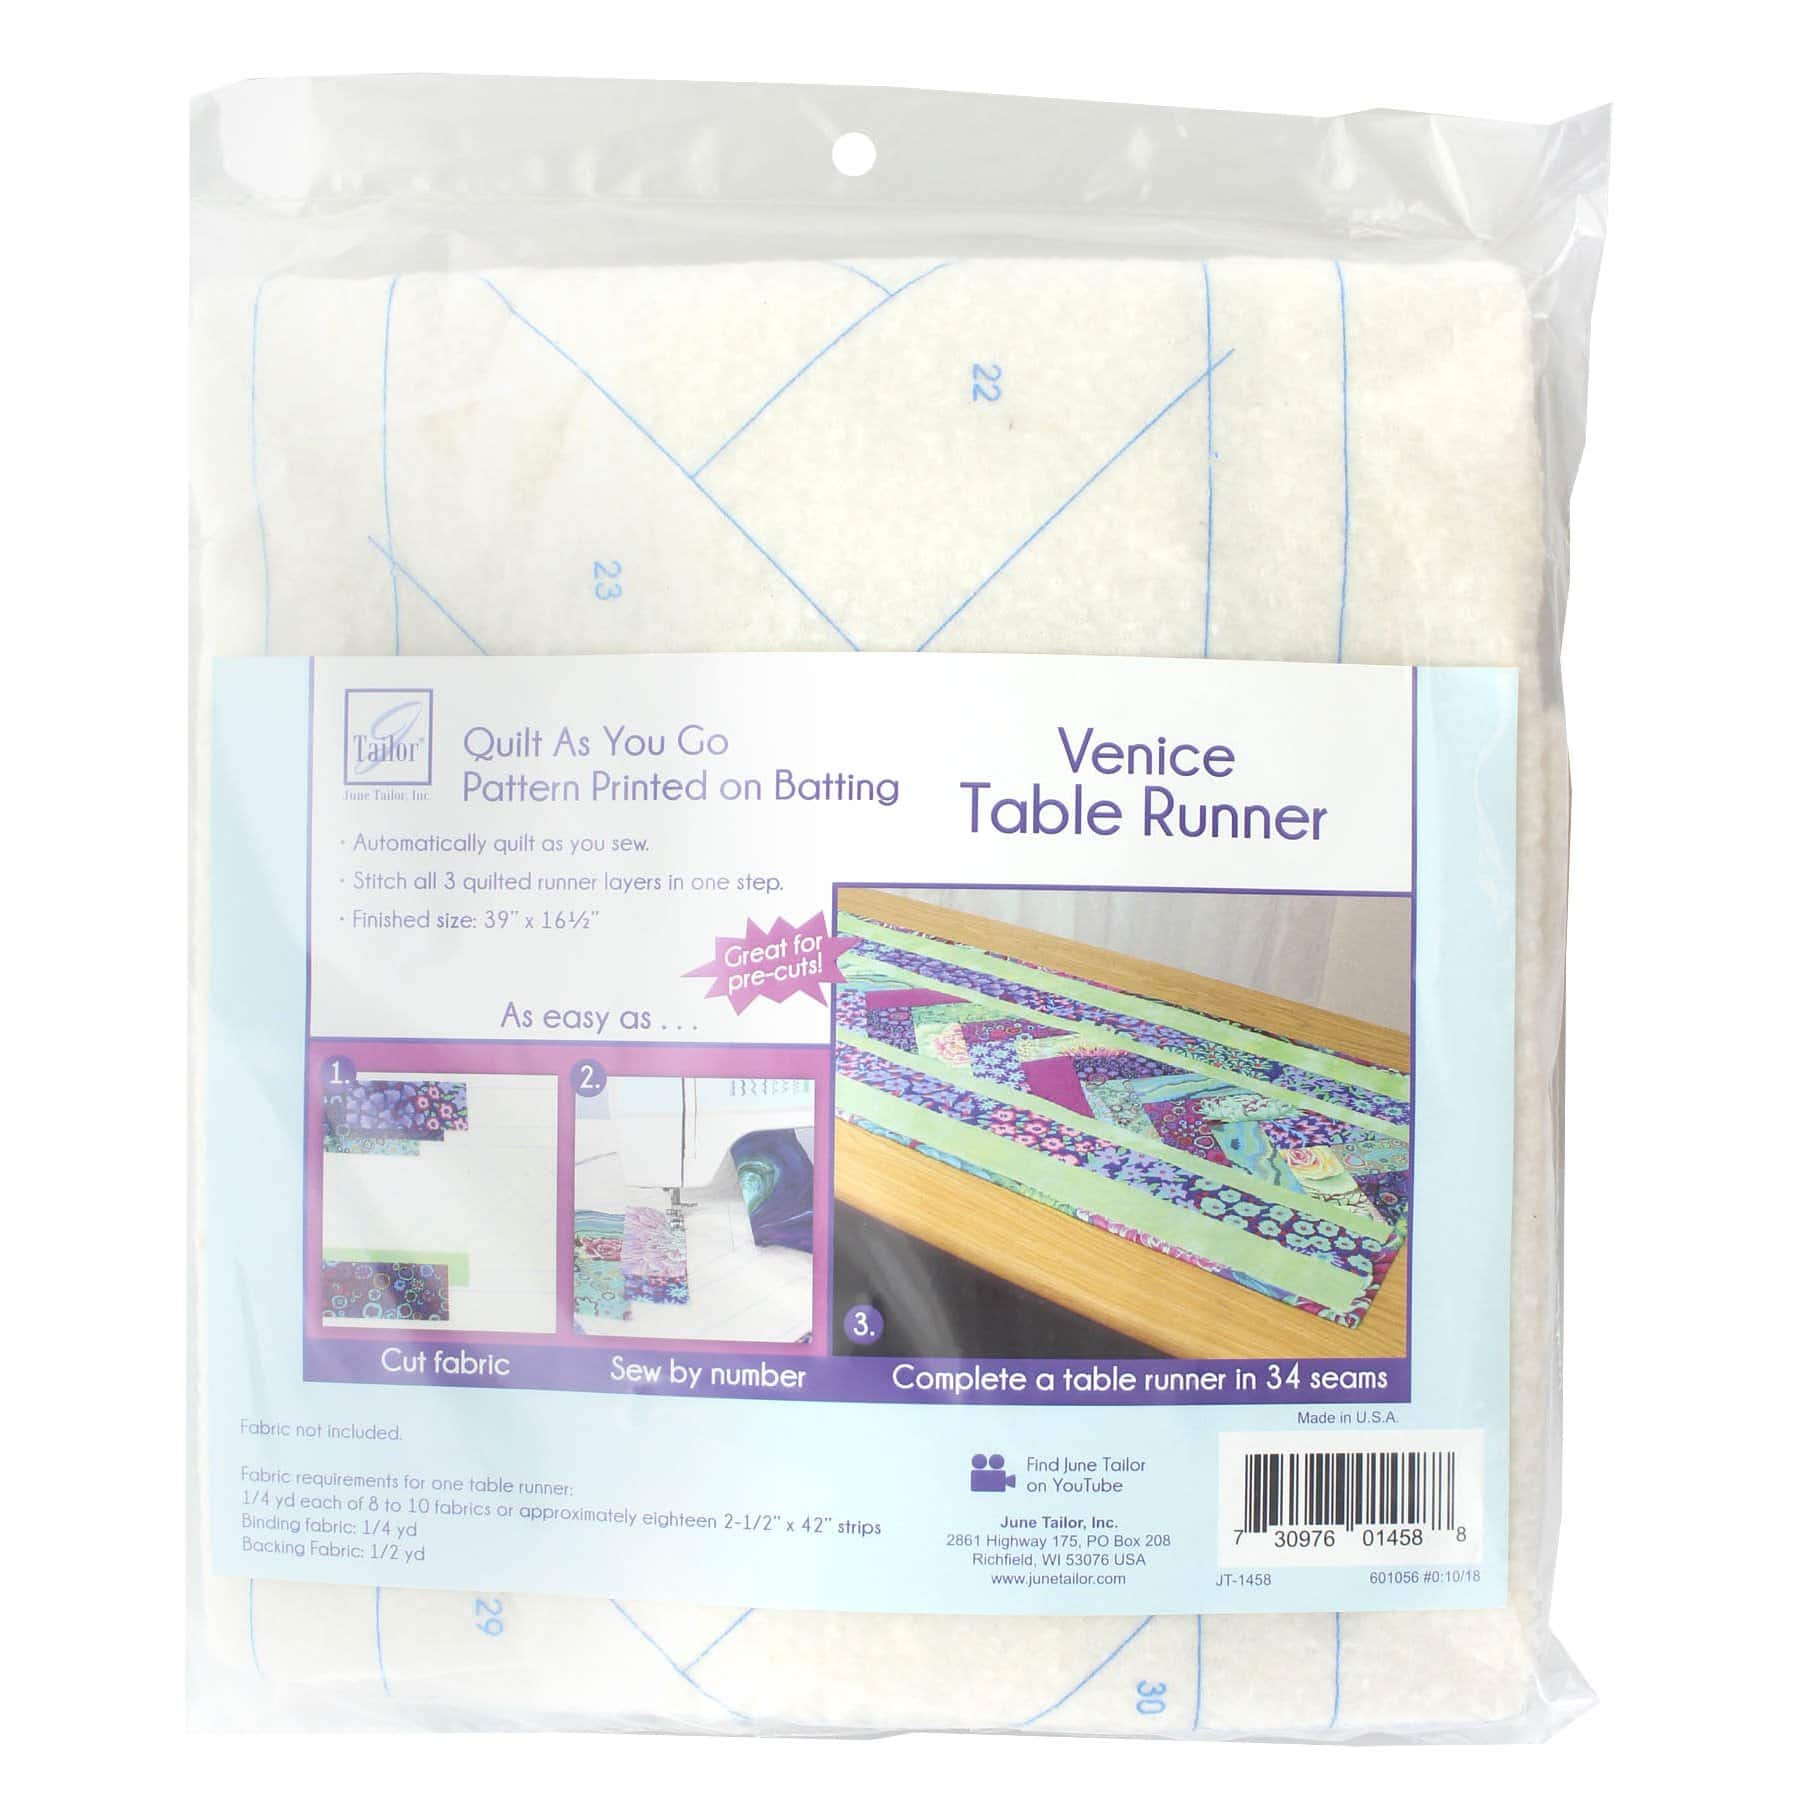 June Tailor Quilt As You Go Venice Table Runner